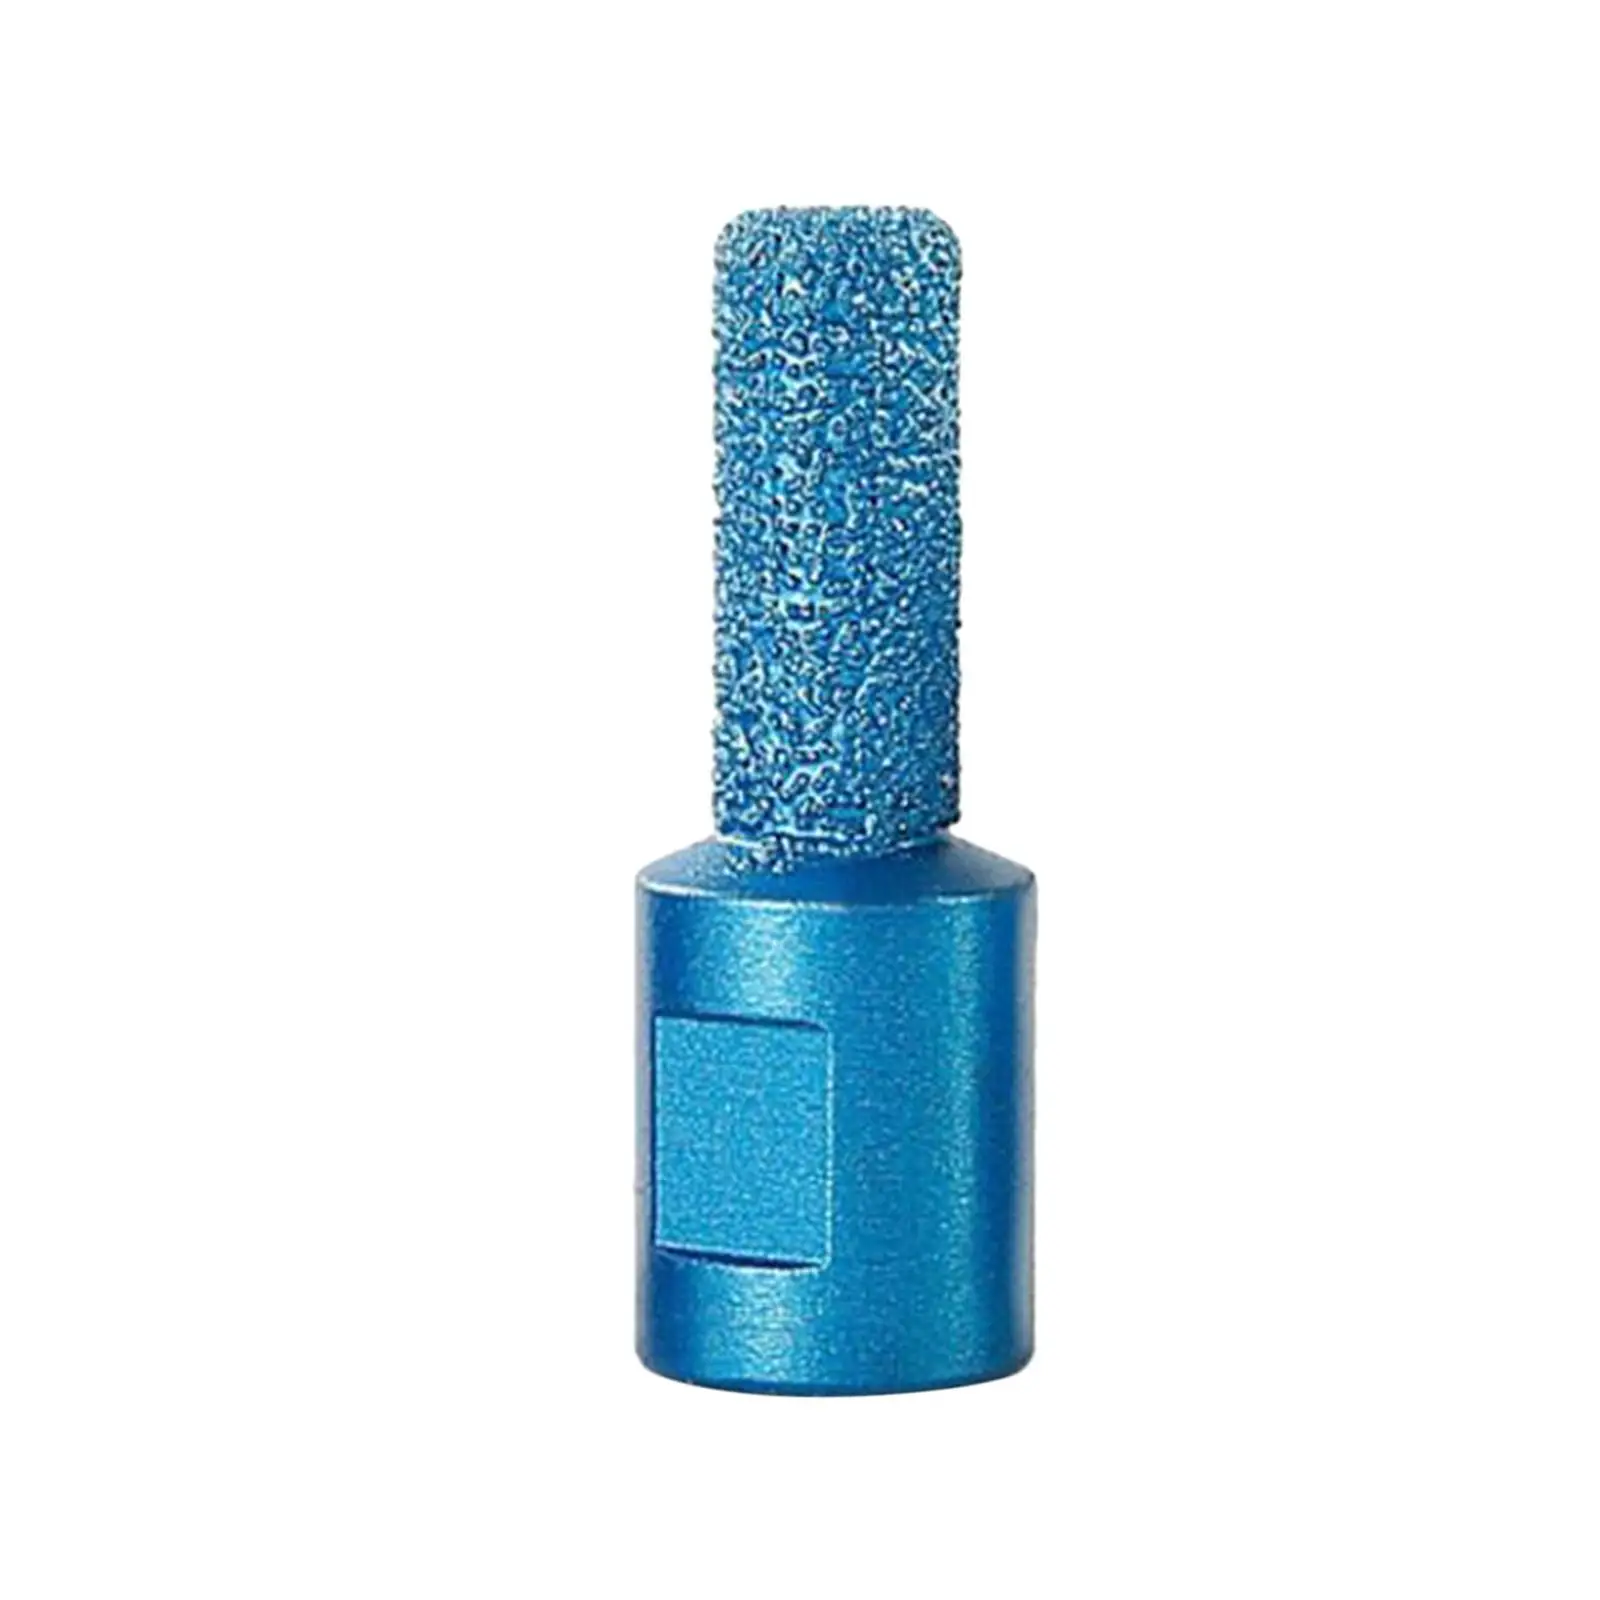 Trimming Milling Cutter Durable Pressure Resistance Replacements Accessories Shock Resistance Carving Tool Diamond Finger Bit